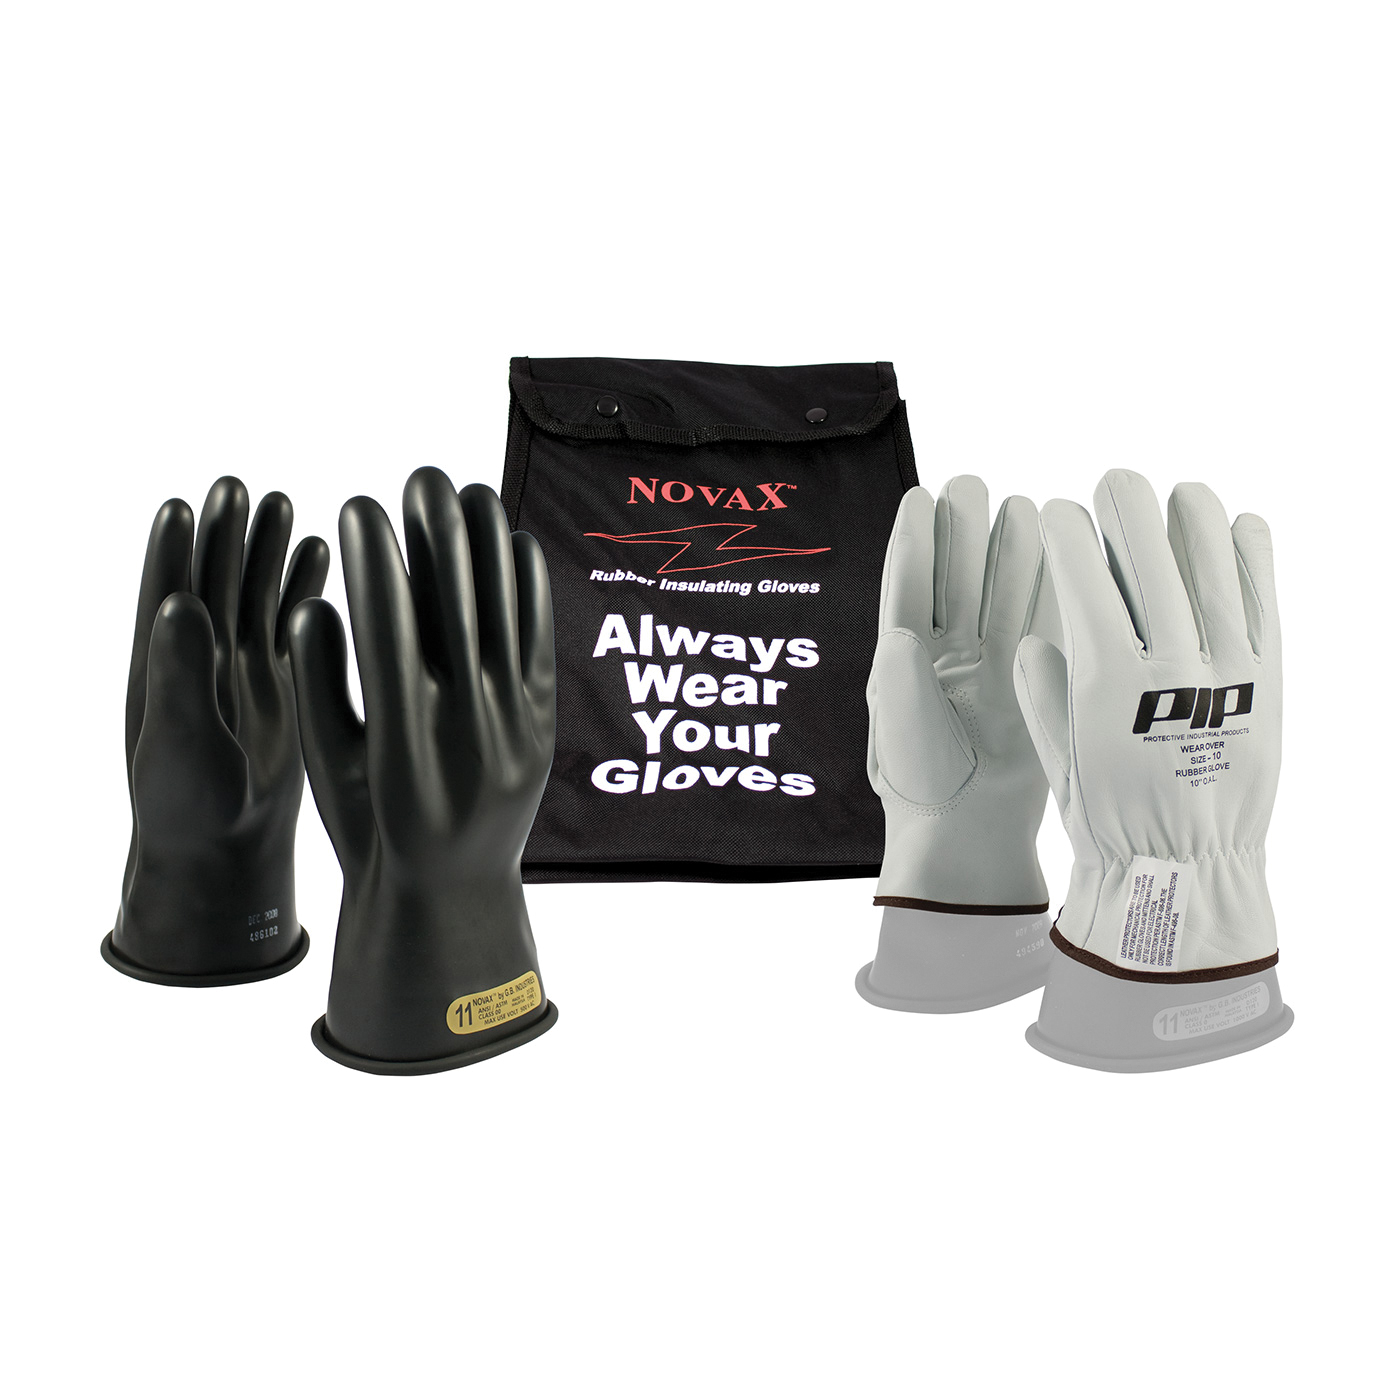 Novax® 150-SK-00/8-KIT Insulating Unisex Electrical Safety Gloves Kit, SZ 8, Goatskin Leather/Natural Rubber, Black/Natural, 11 in L, ASTM Class: Class 00, 500 VAC, 750 VDC Max Use Voltage